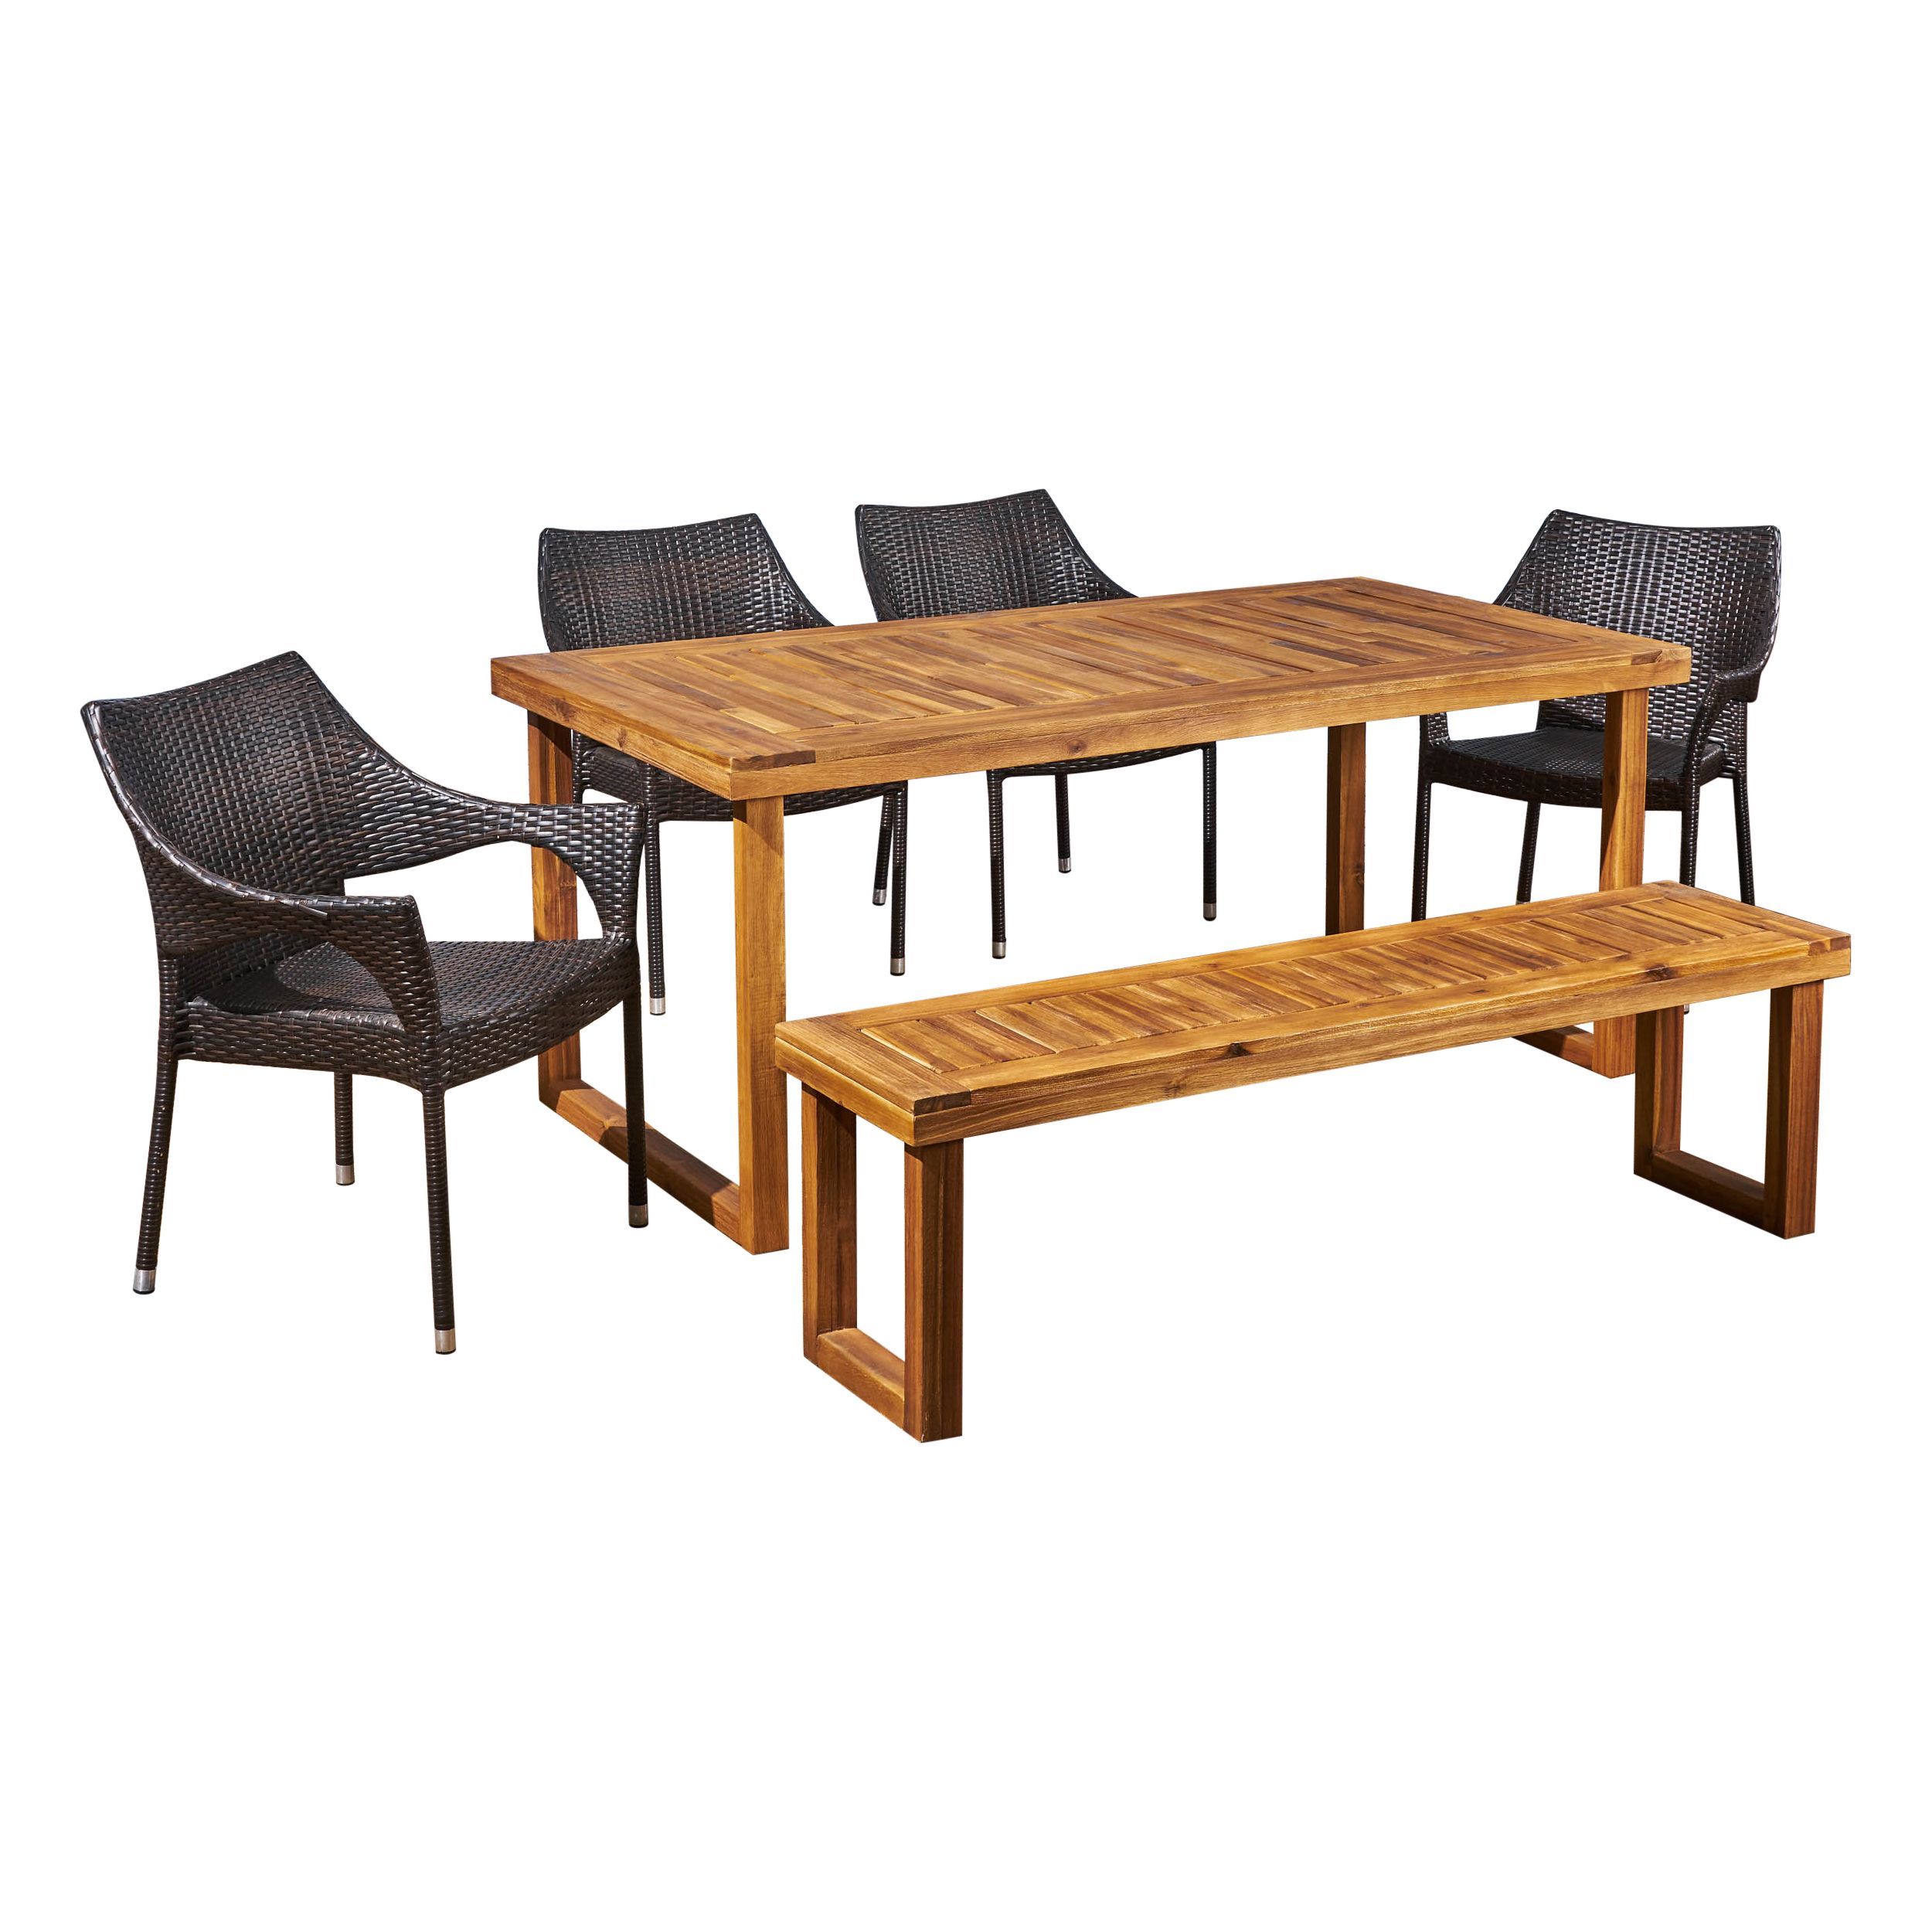 Amina Outdoor 6 Piece Acacia Wood Dining Set With Bench And Wicker With Most Current Brown Acacia 6 Piece Patio Dining Sets (View 8 of 15)